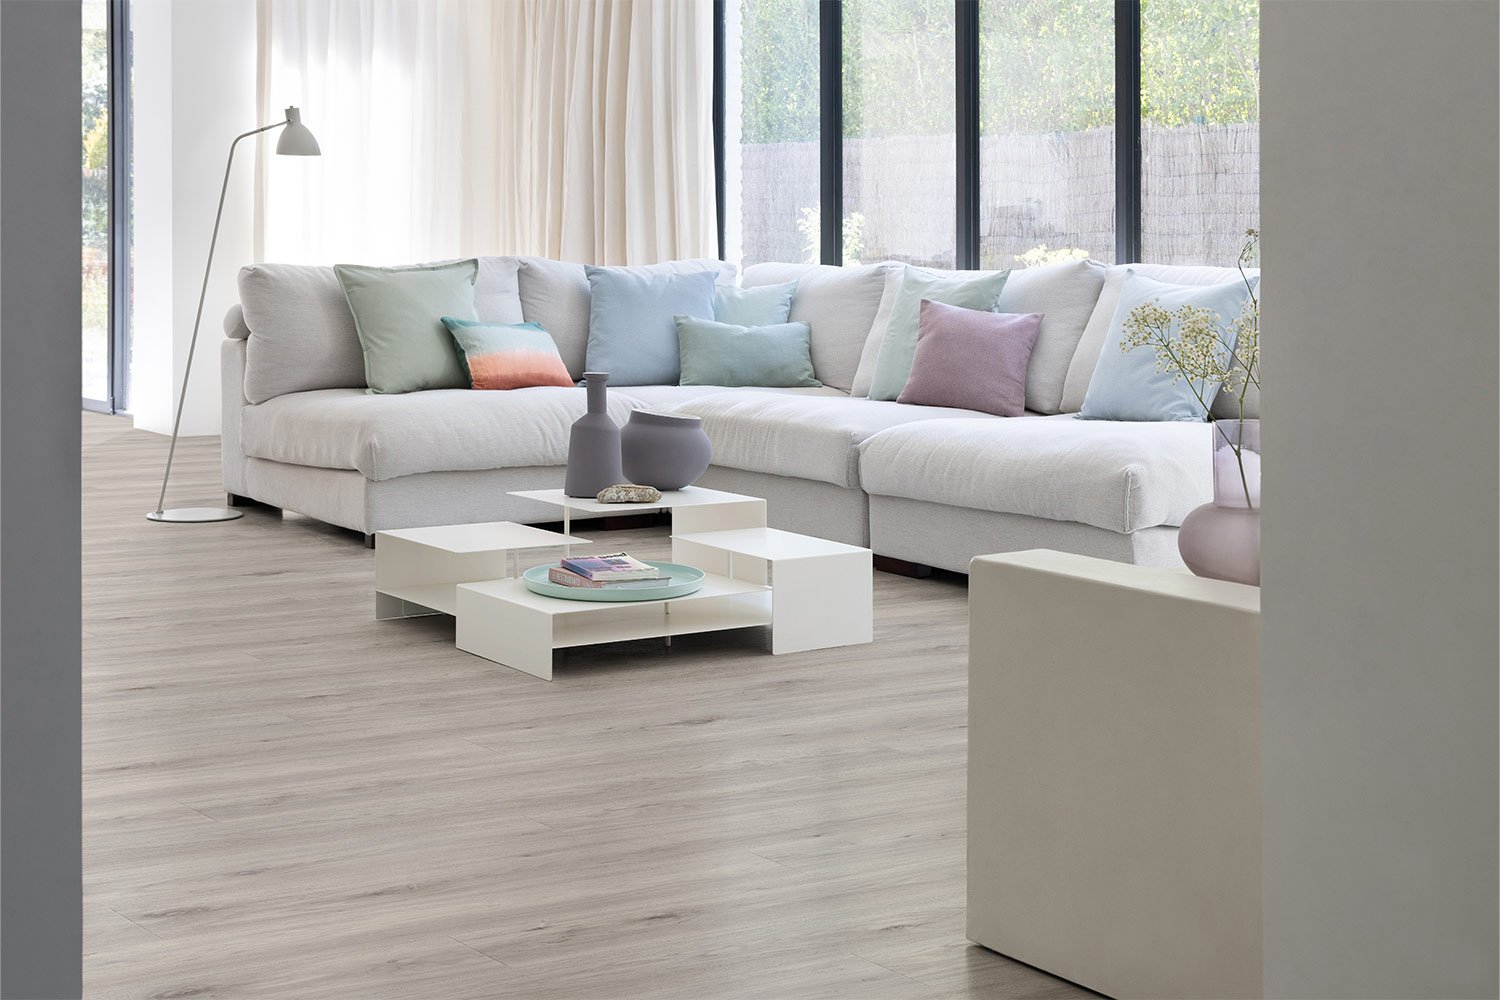 Luxury vinyl flooring - Roots collection - Breeze in the north style - Sierra Oak 58936